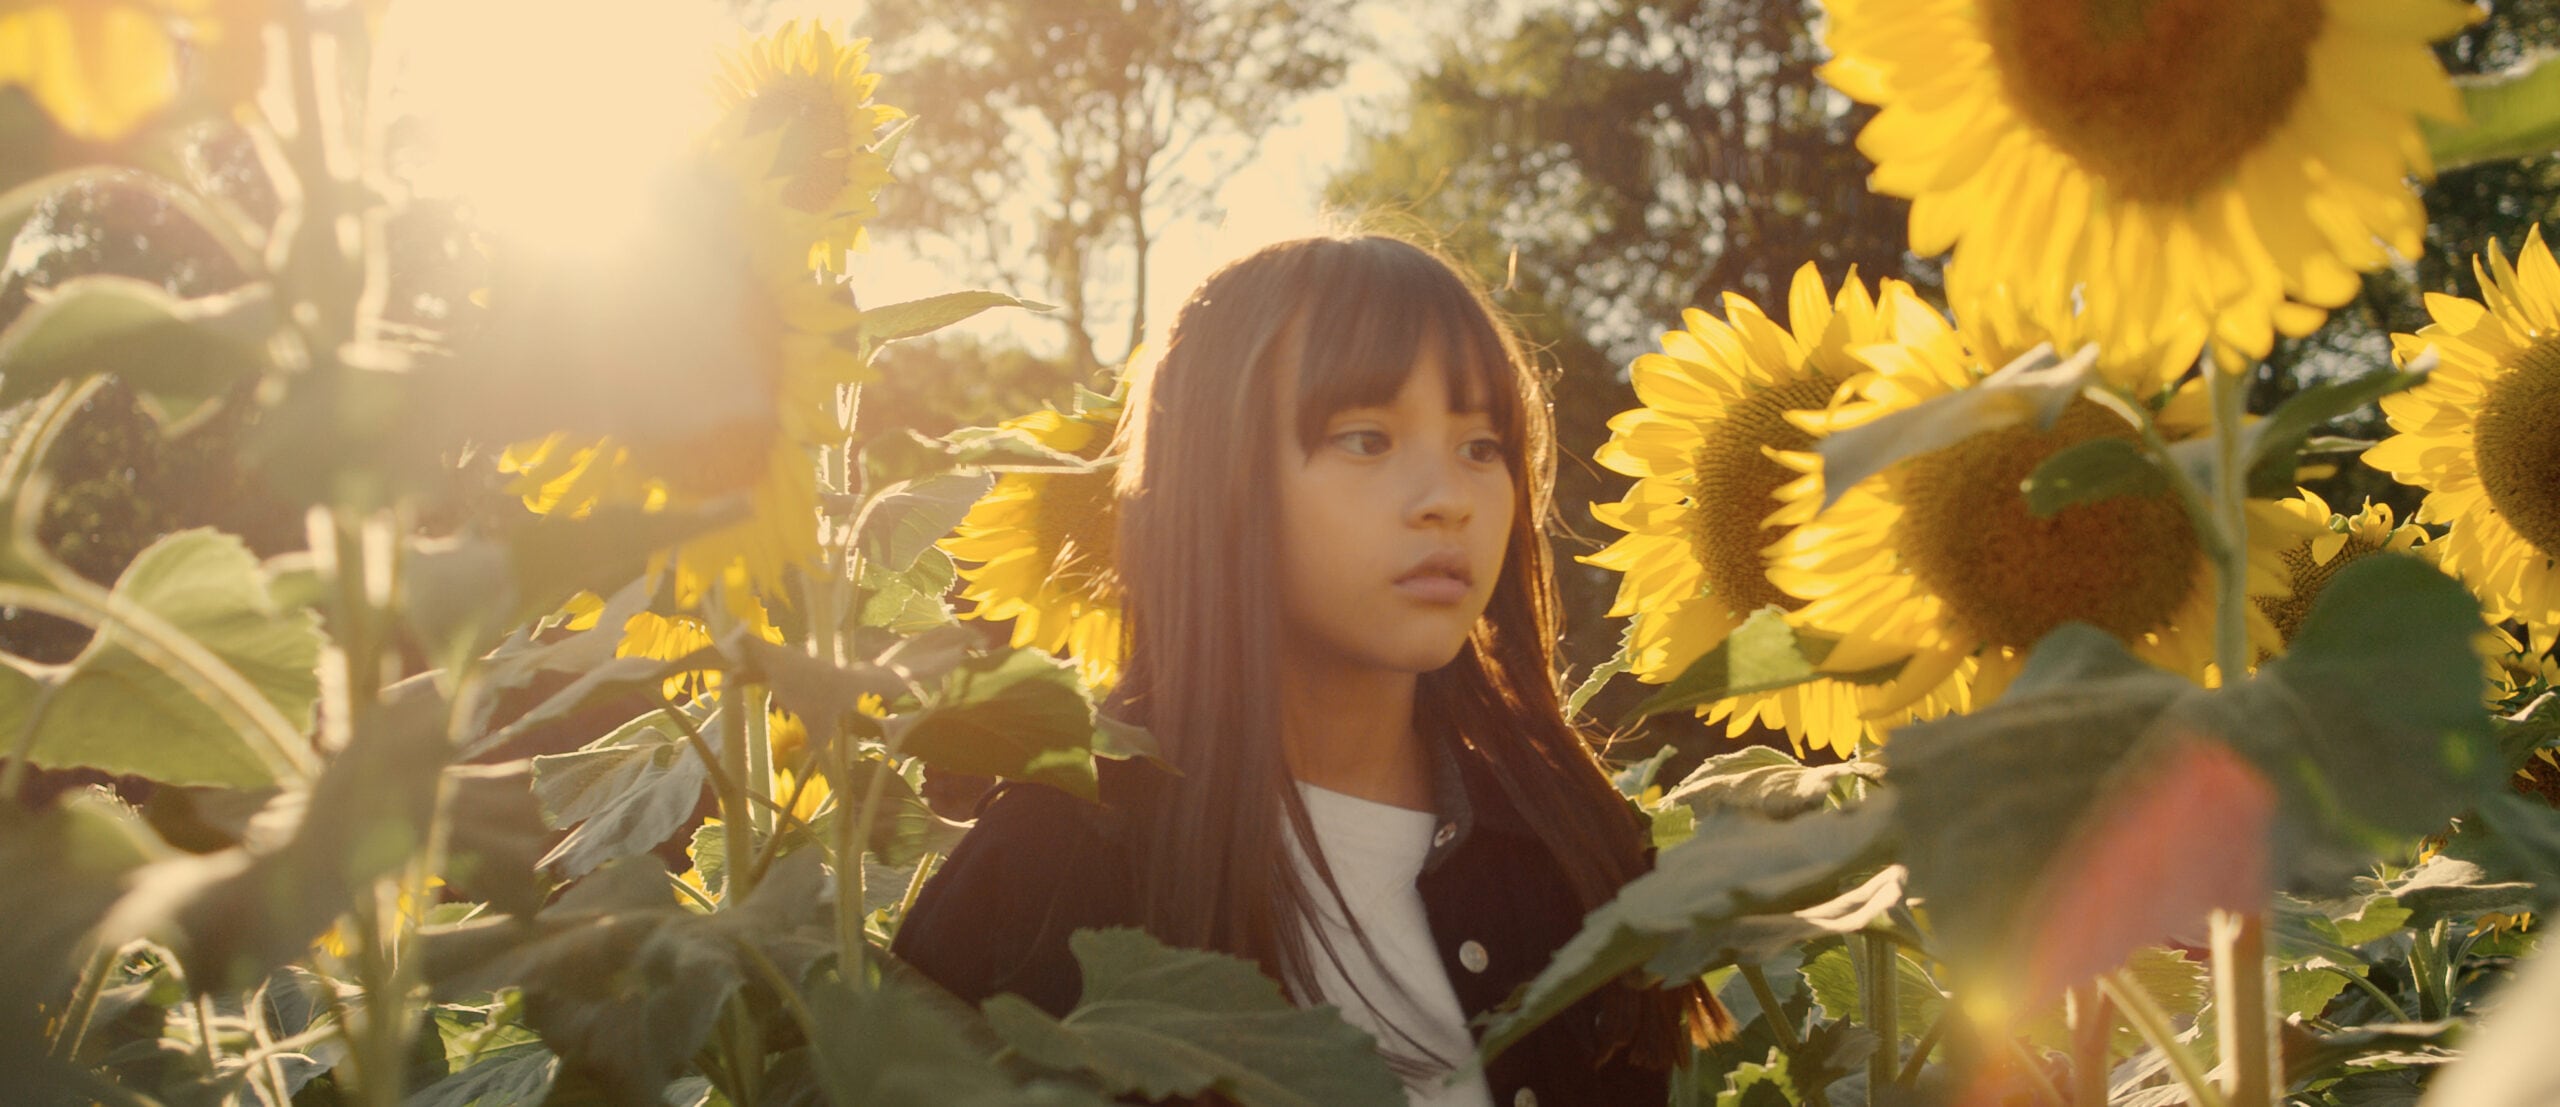 A child walking through a field of sunflowers, sun shining in the sky